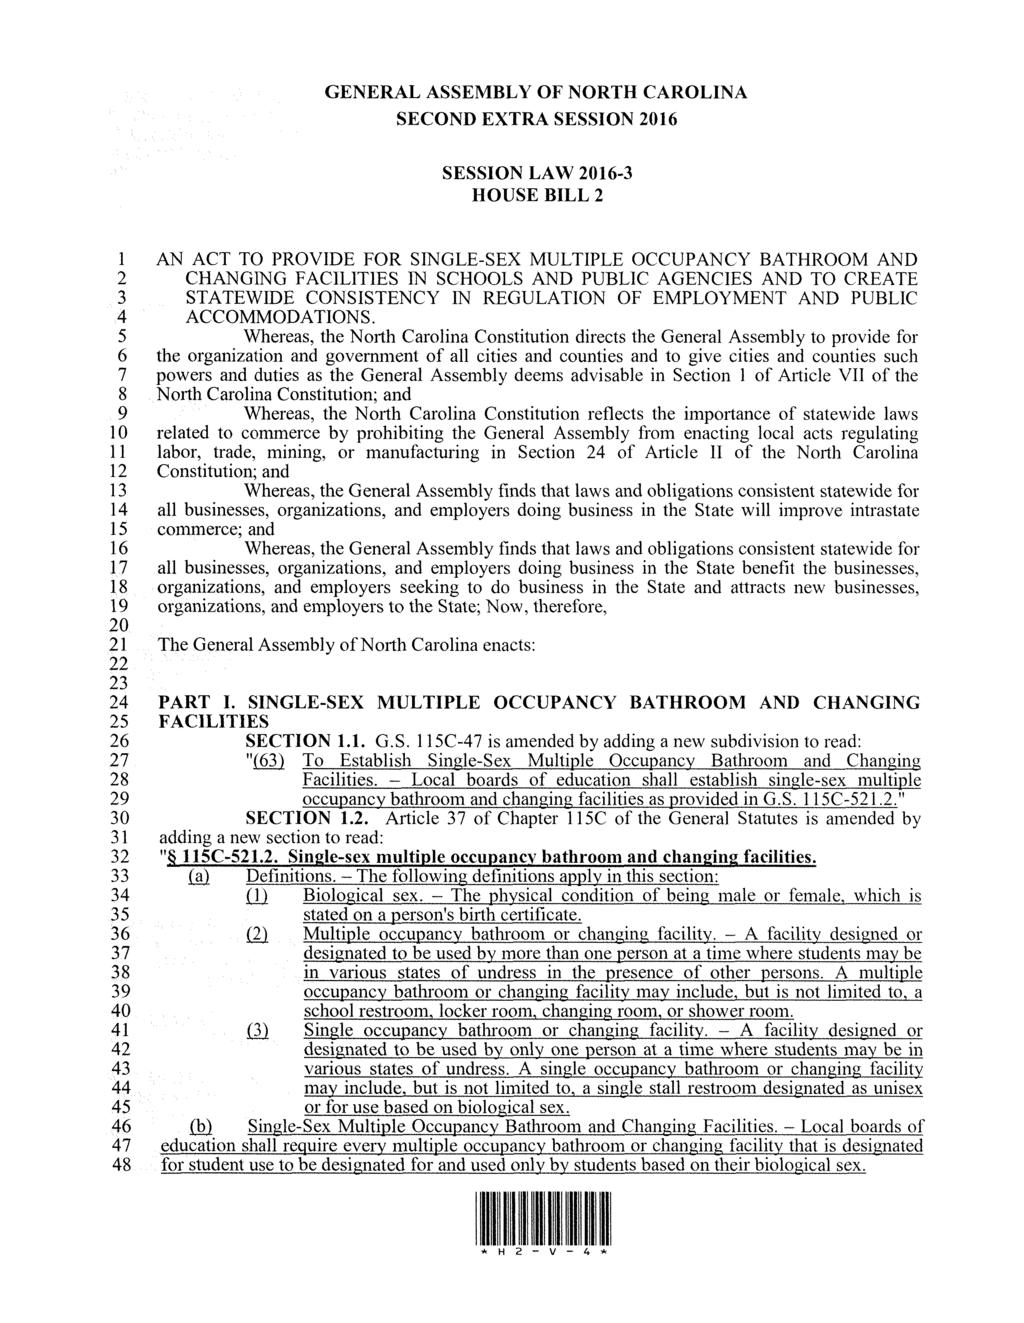 GENERAL ASSEMBLY OF NORTH CAROLINA SECOND EXTRA SESSION 2016 SESSION LAW 2016-3 HOUSE BILL 2 1 2 3 4 AN ACT TO PROVIDE FOR SINGLE-SEX MULTIPLE OCCUPANCY BATHROOM AND CHANGING FACILITIES IN SCHOOLS